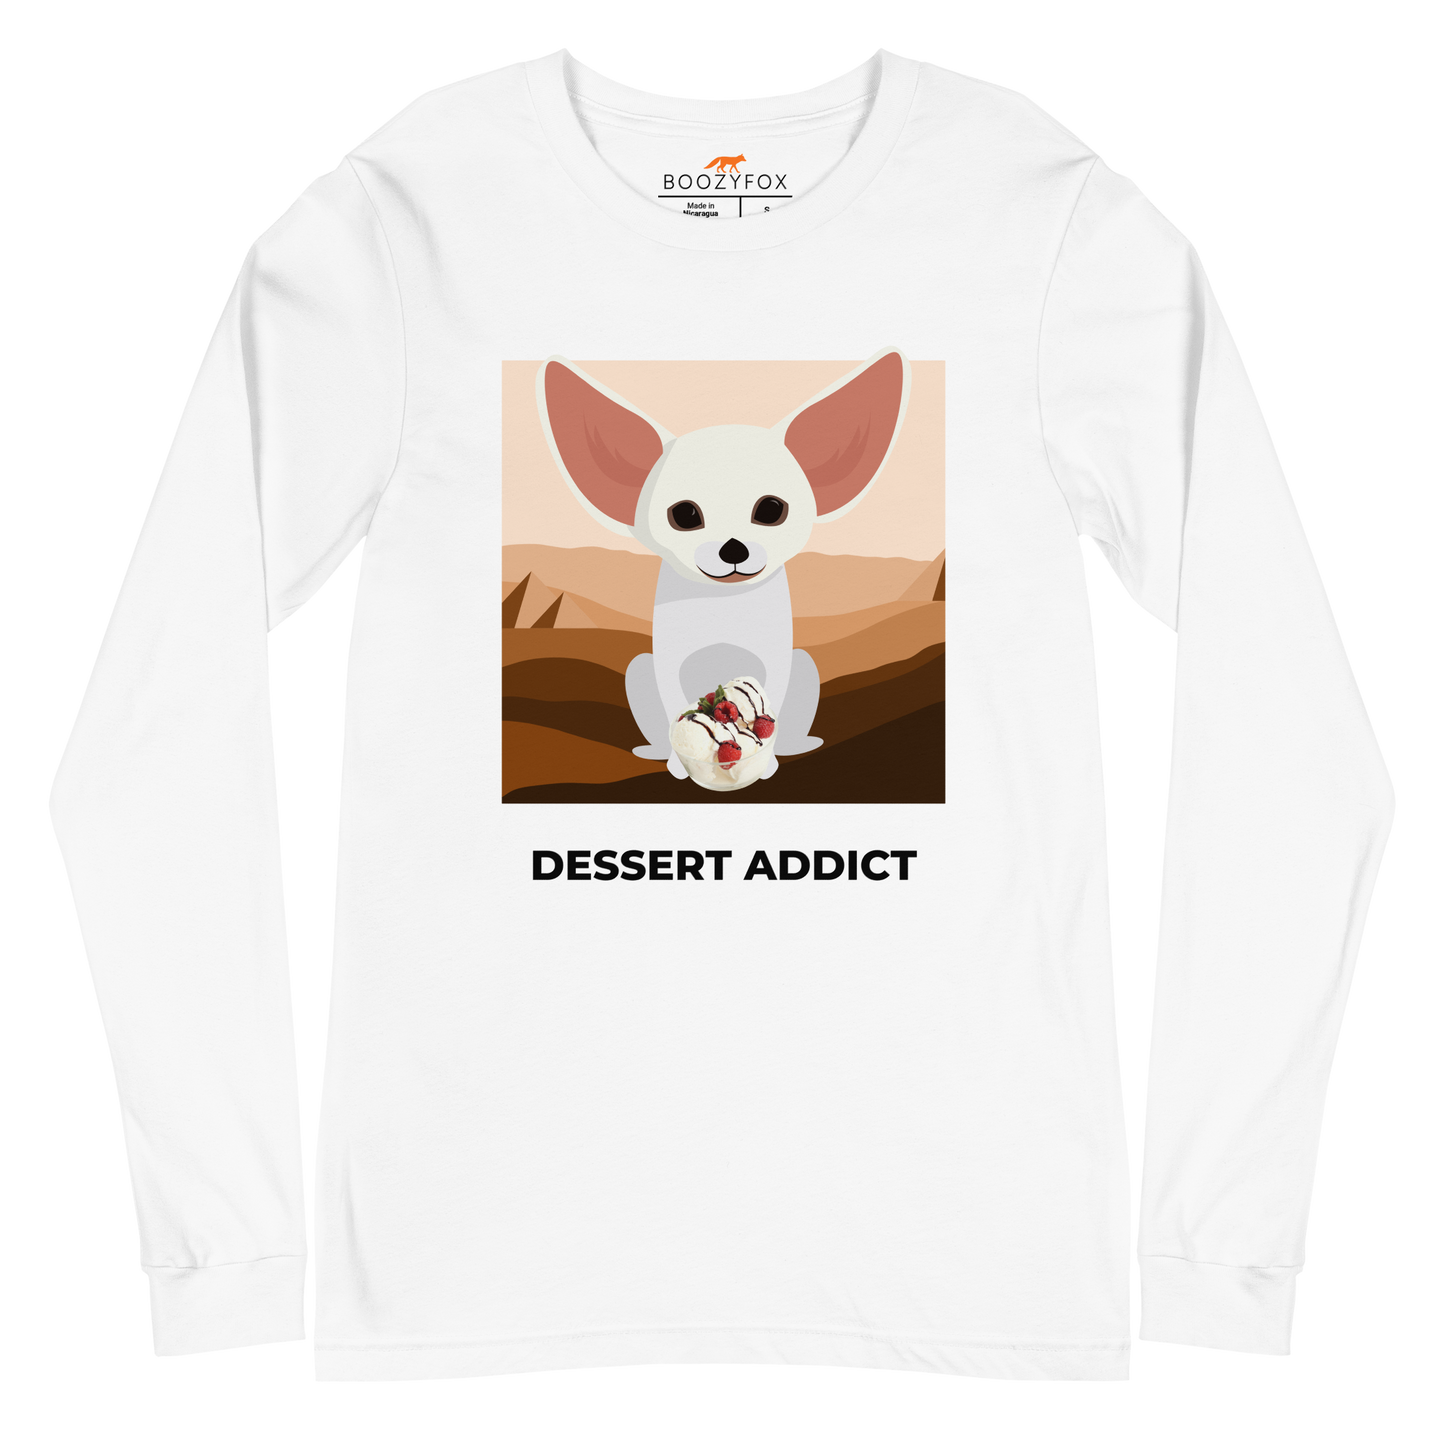 White Fennec Fox Long Sleeve Tee featuring a delightful Dessert Addict graphic on the chest - Funny Fennec Fox Long Sleeve Graphic Tees - Boozy Fox